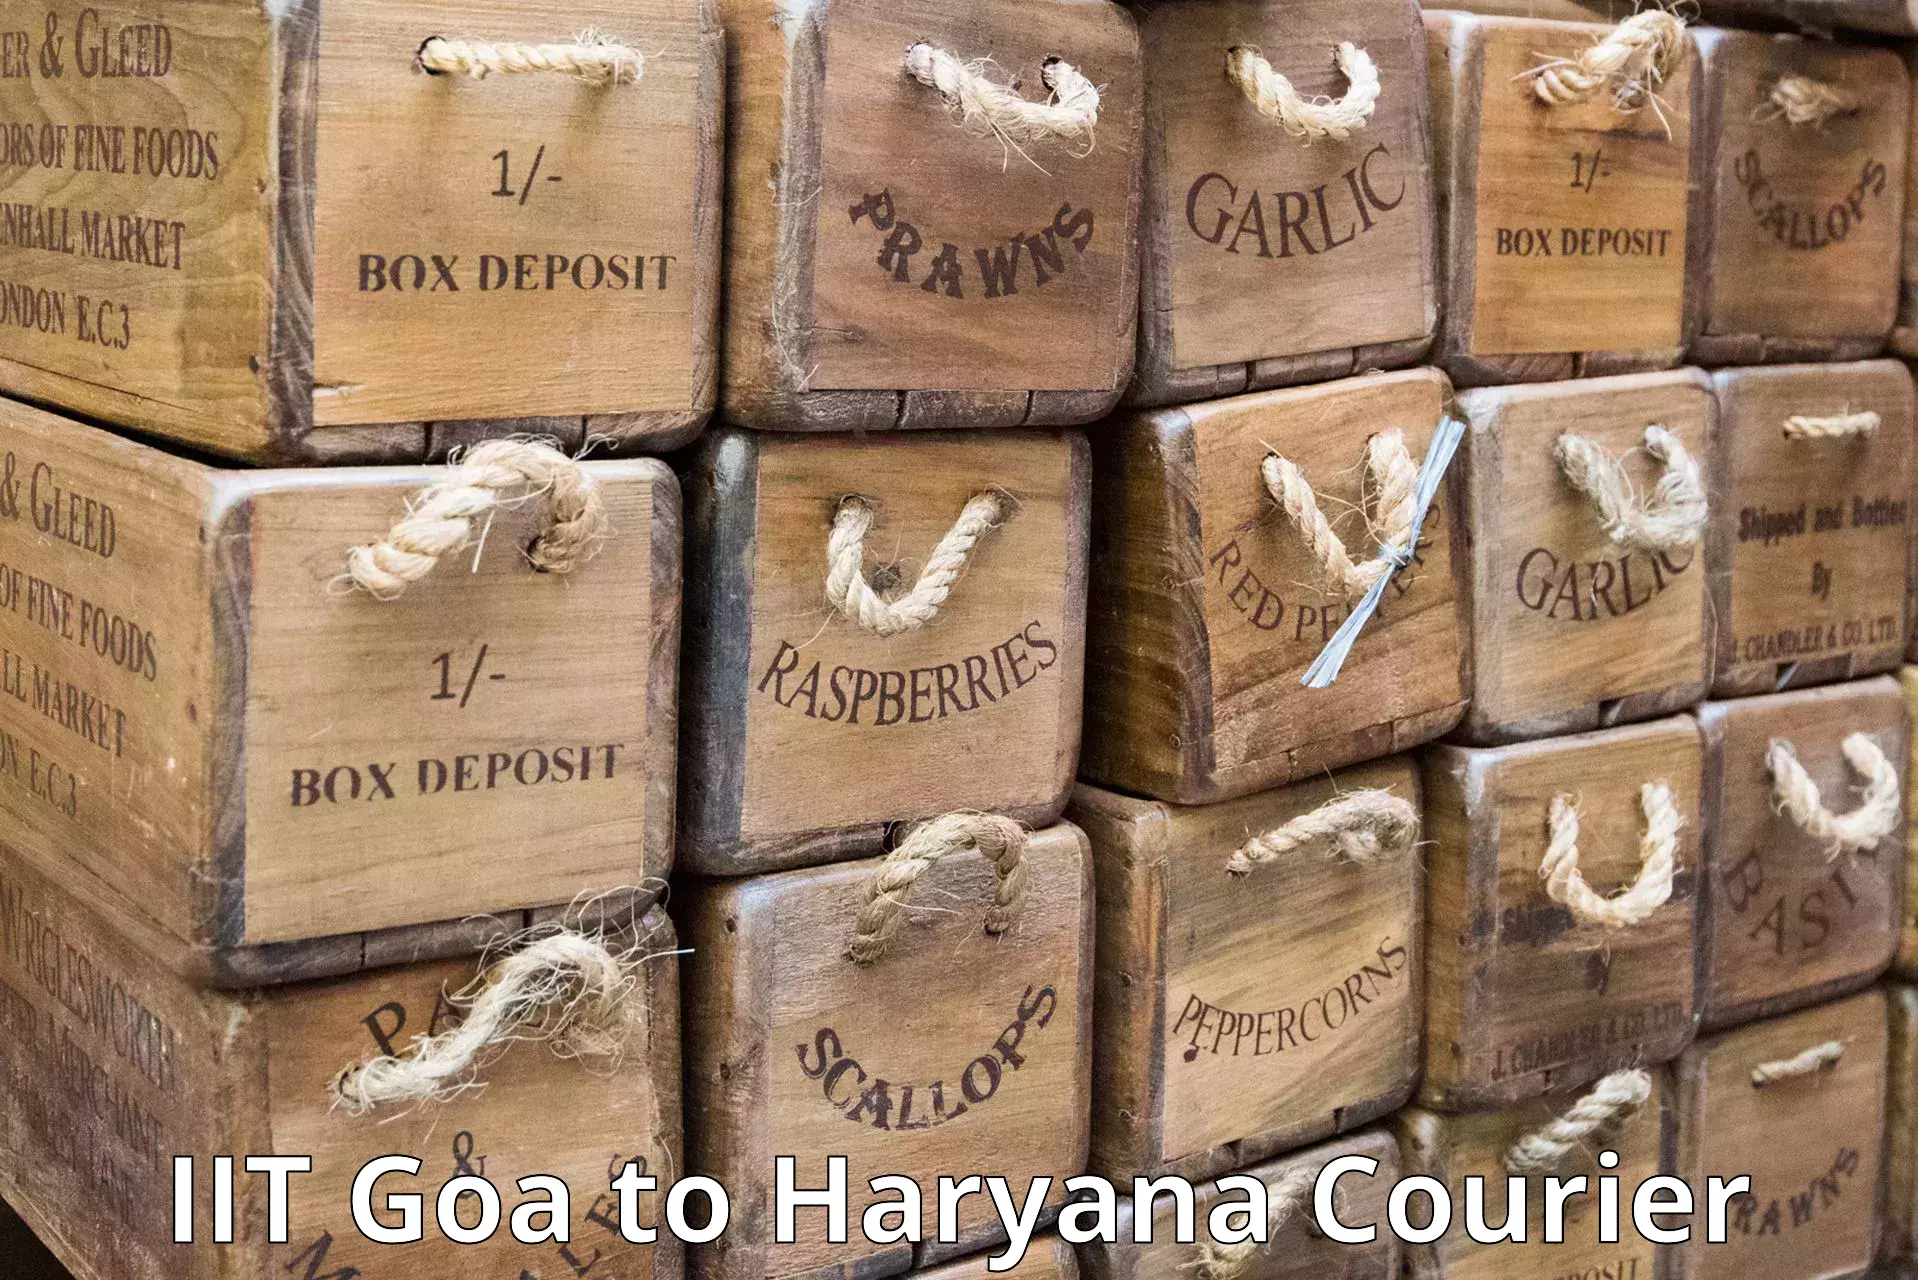 Corporate courier solutions IIT Goa to Narwana